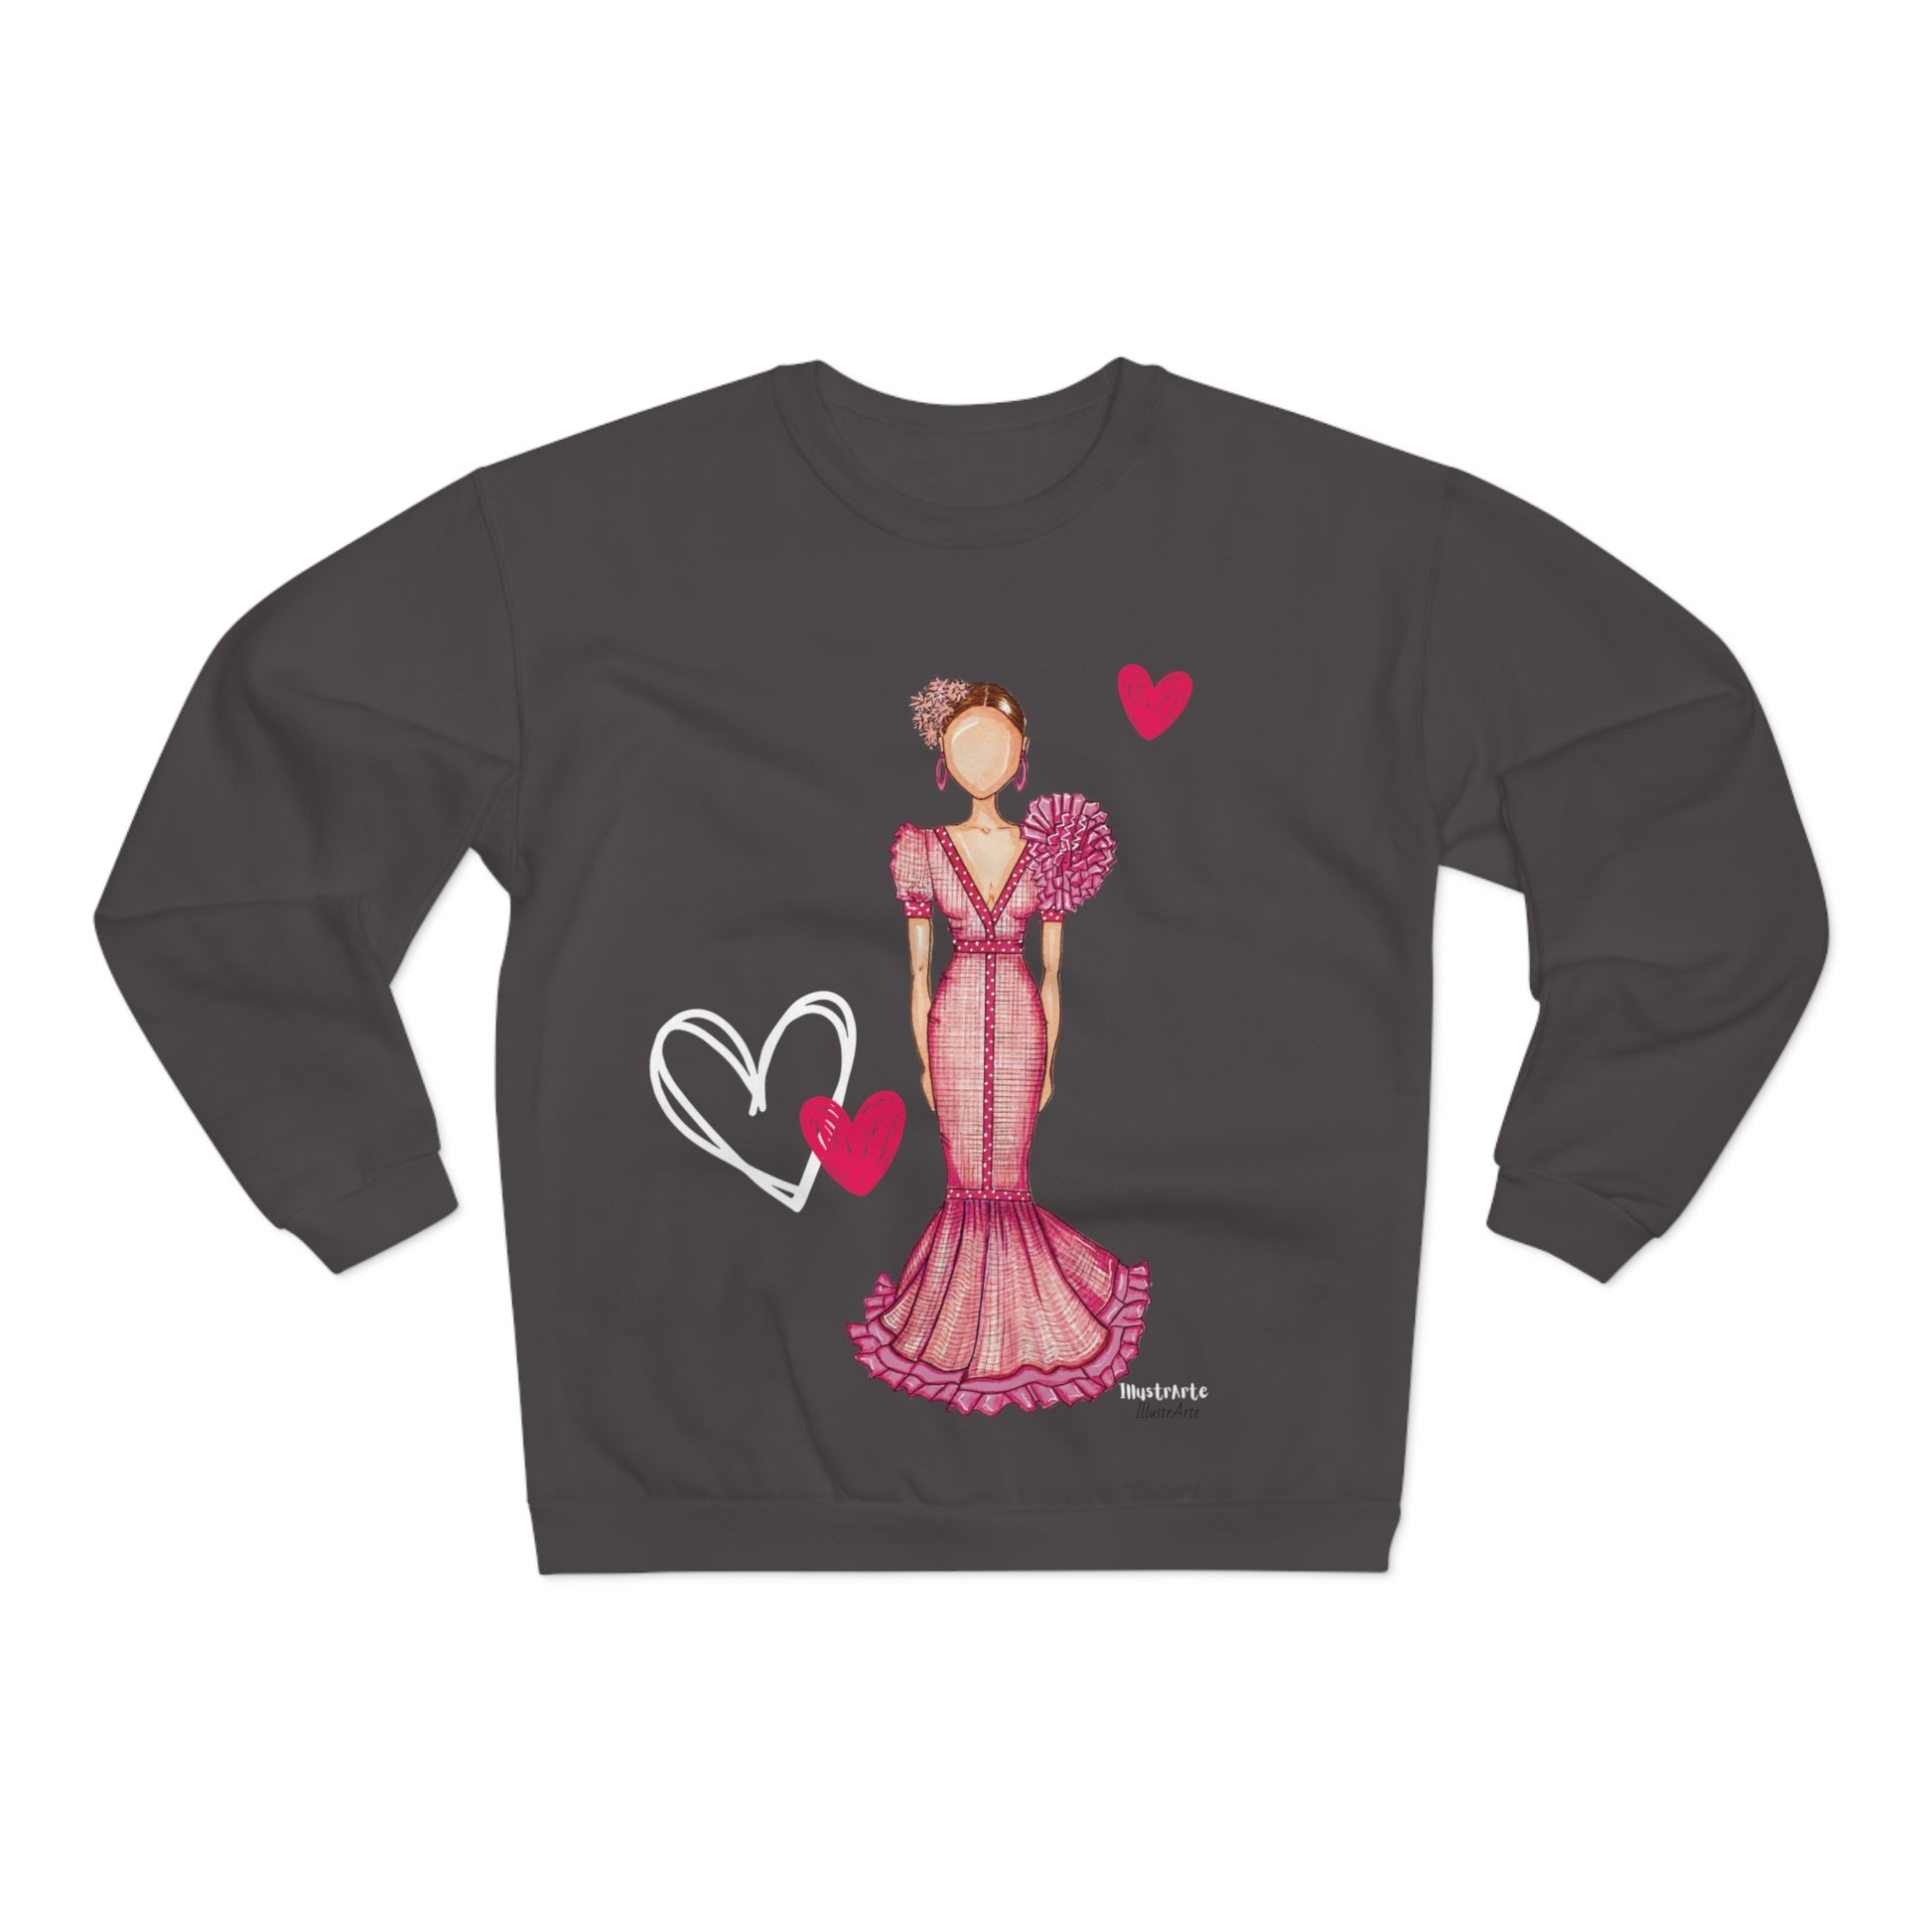 a sweater with a woman in a dress and a heart